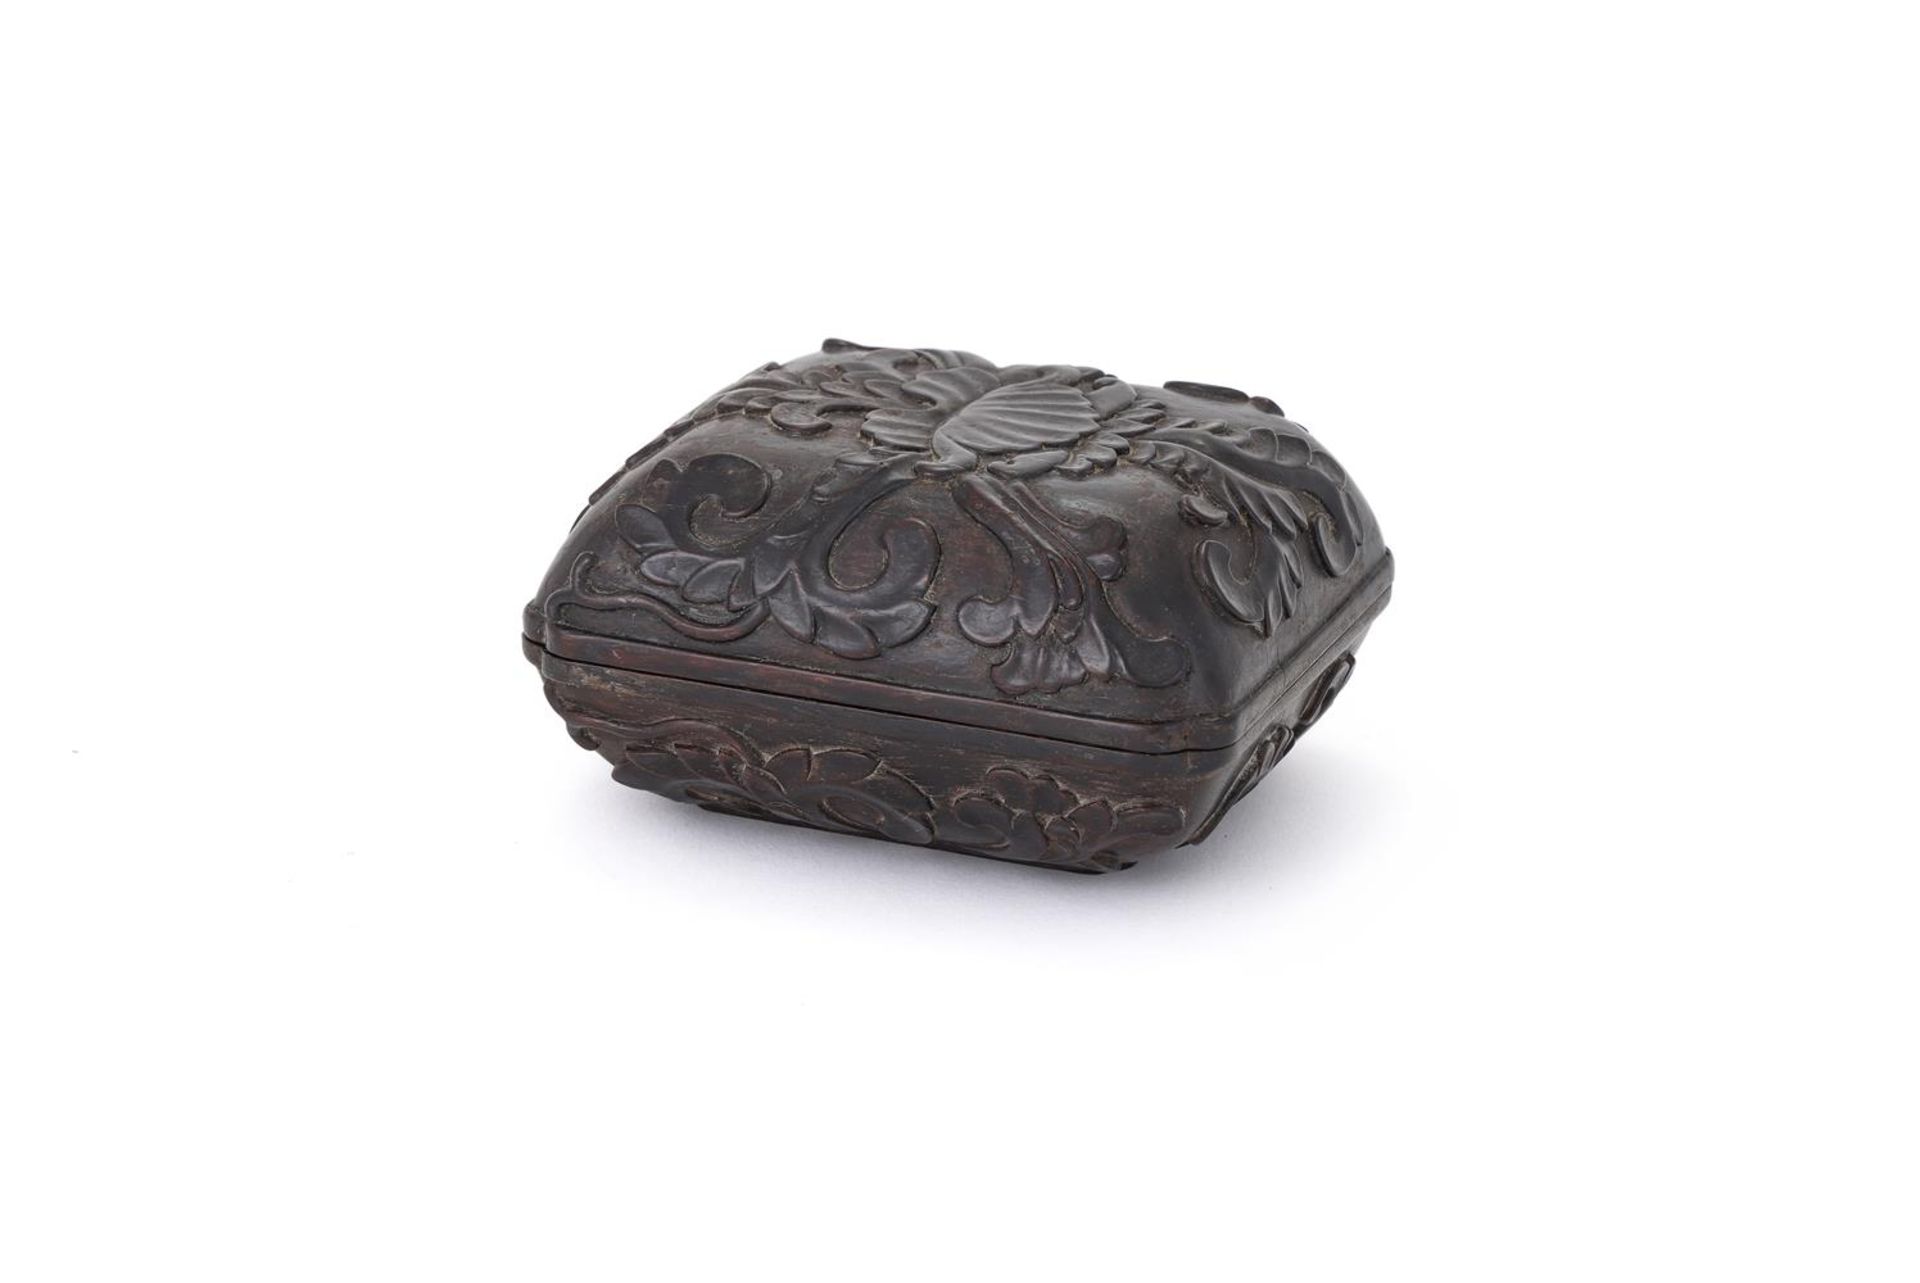 A Chinese zitan box and cover